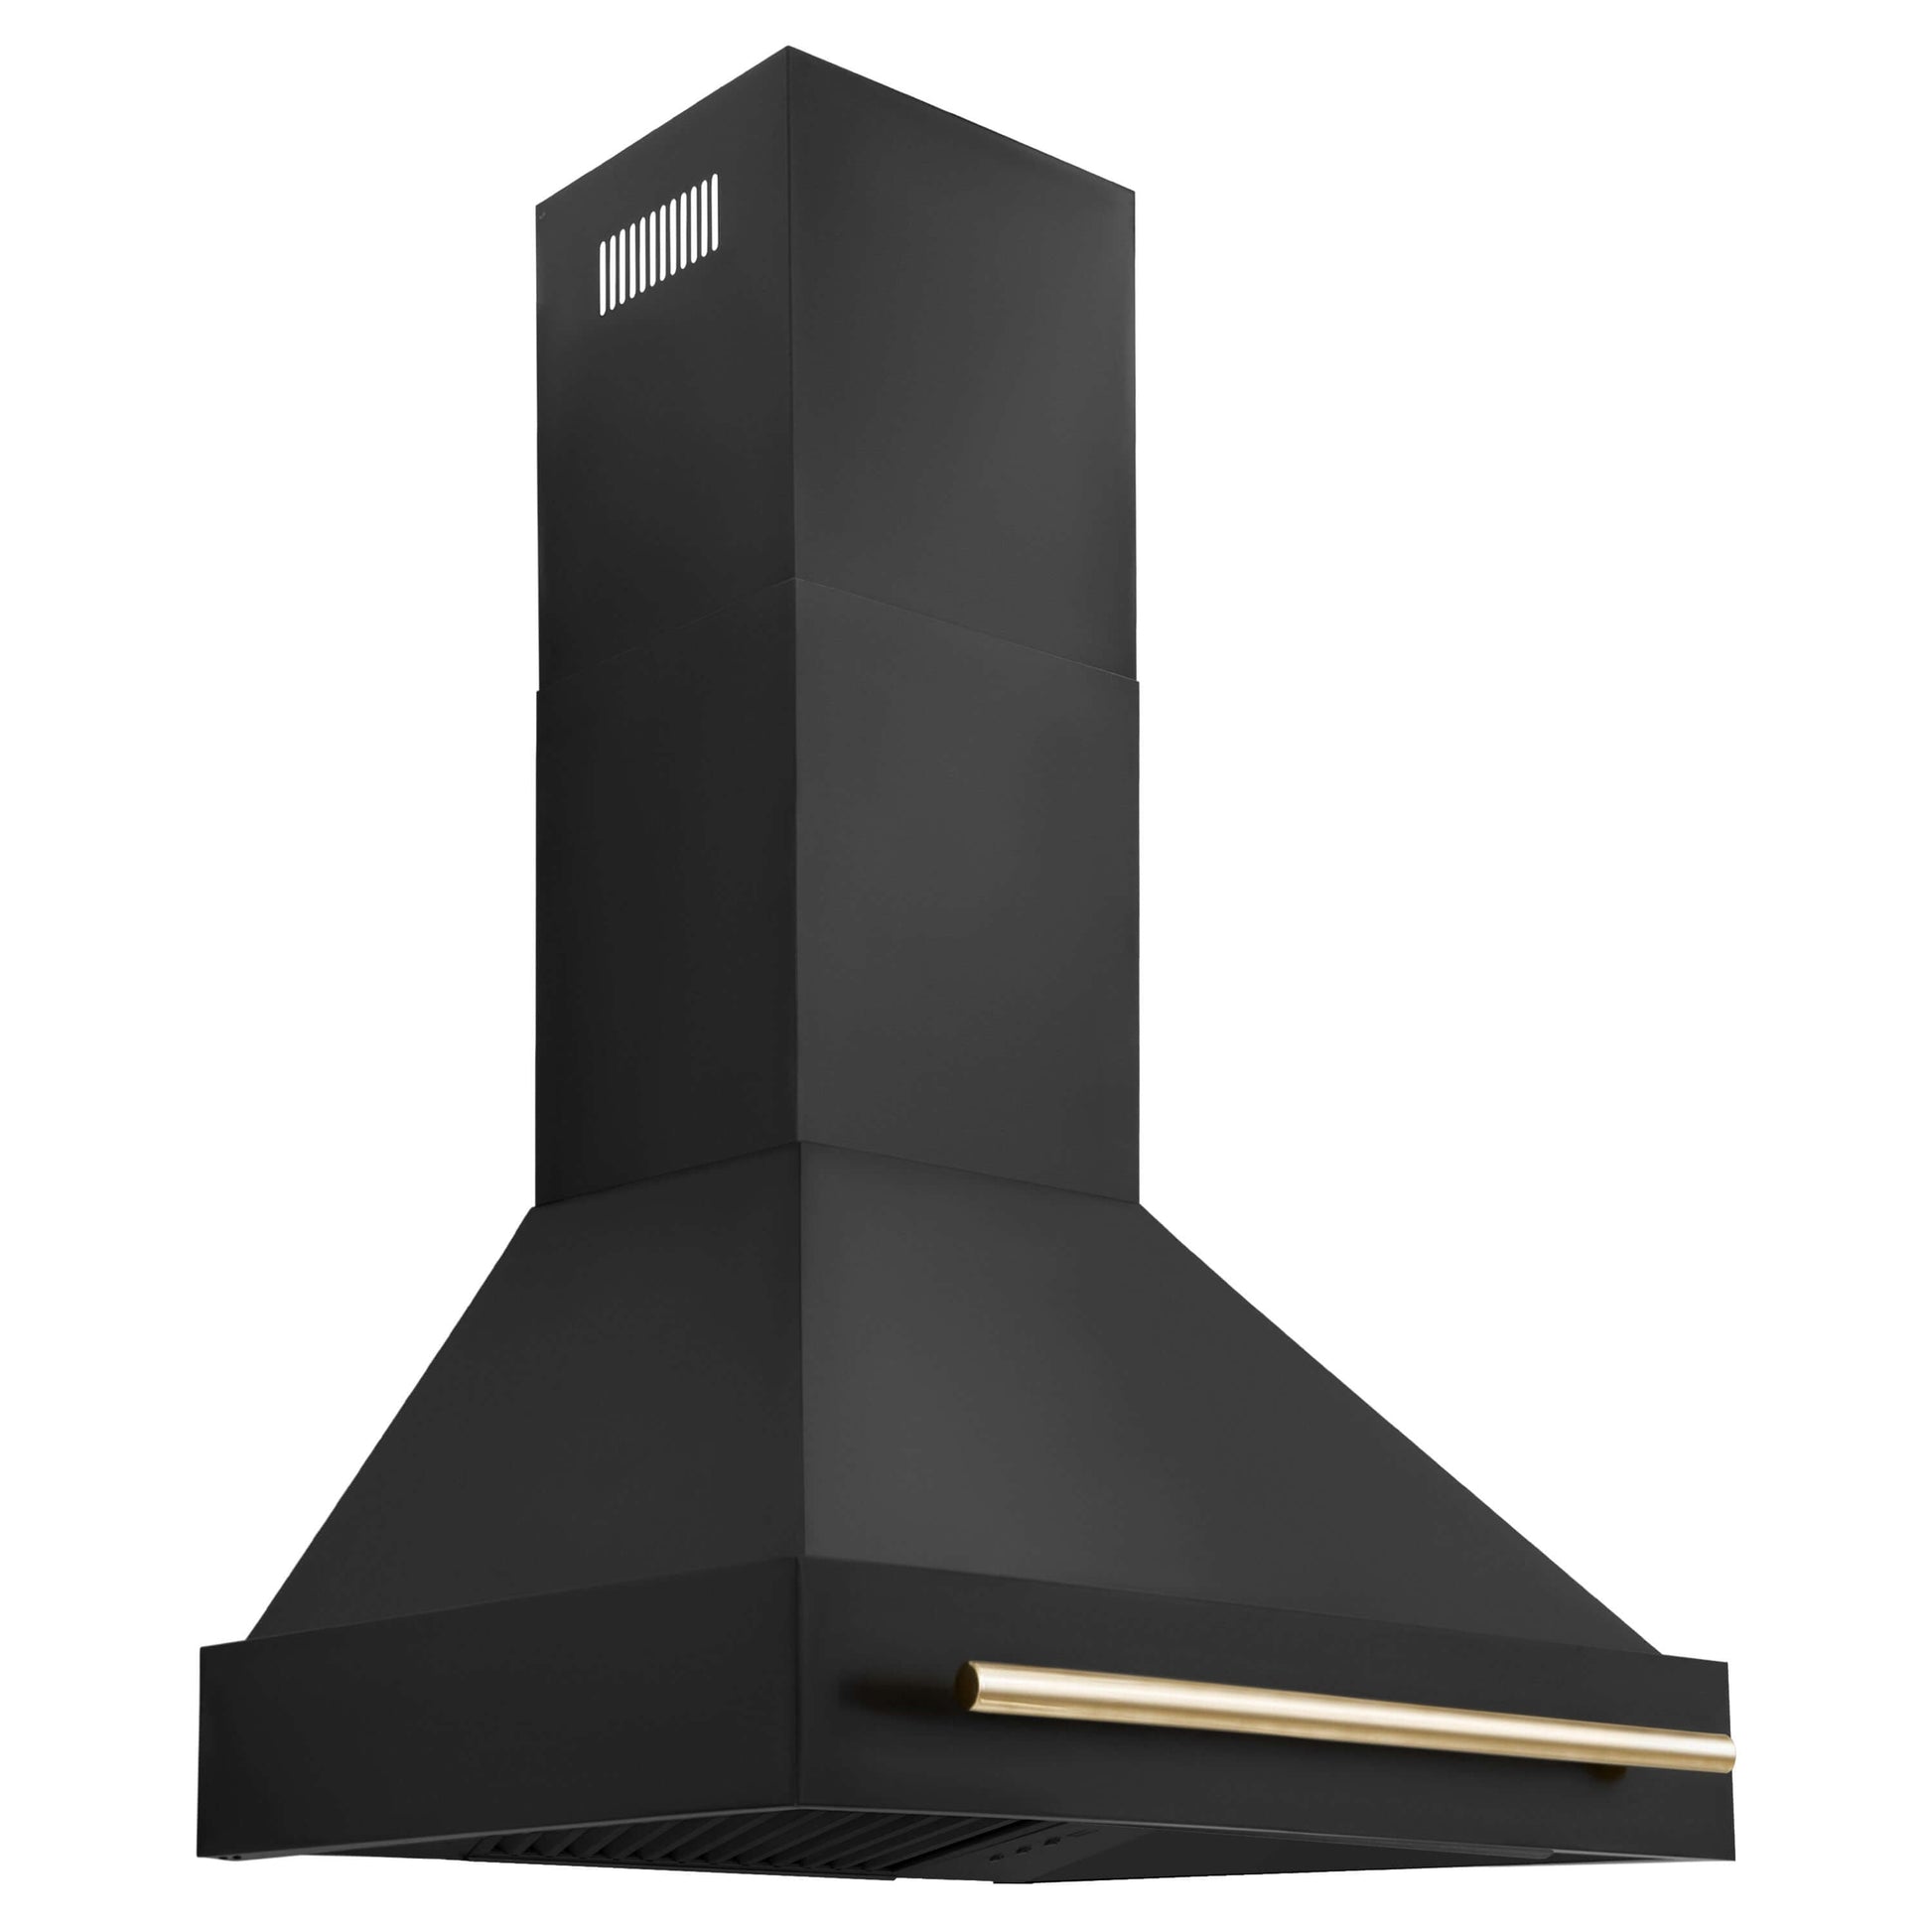 ZLINE 3-Appliance 30" Autograph Edition Kitchen Package with Black Stainless Steel Dual Fuel Range, Range Hood, and Dishwasher with Polished Gold Accents